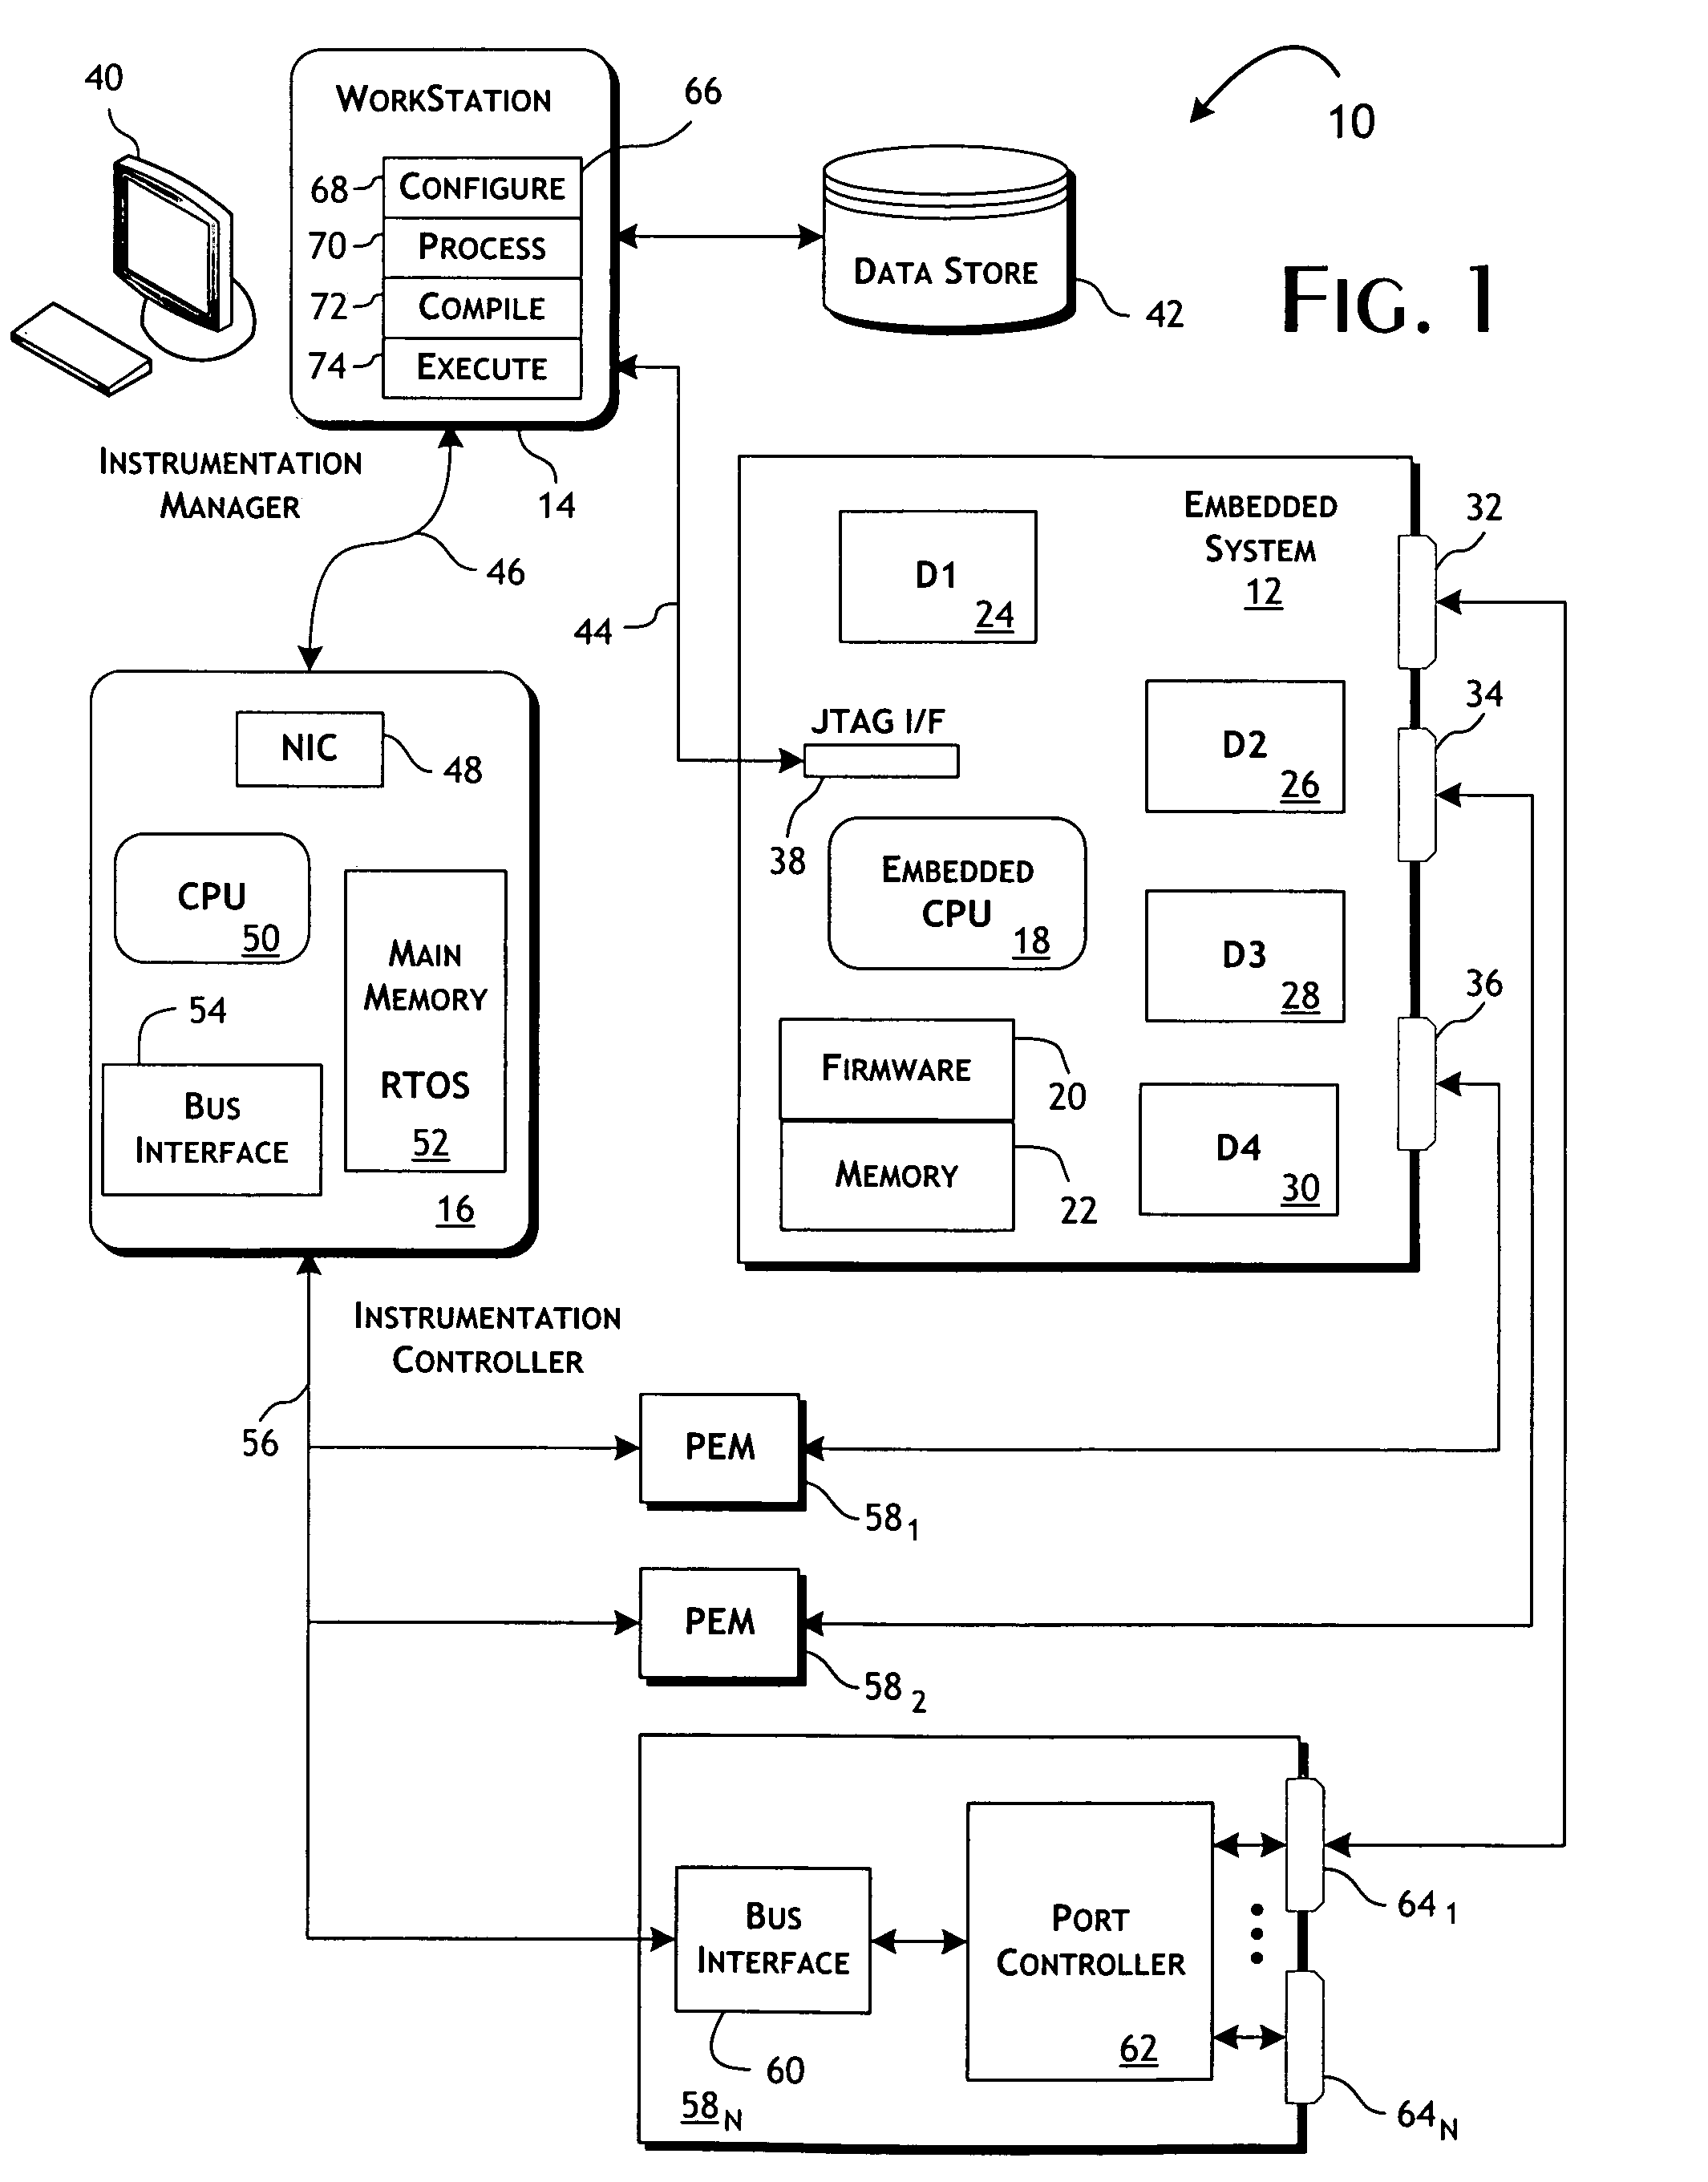 System and methods for functional testing of embedded processor-based systems